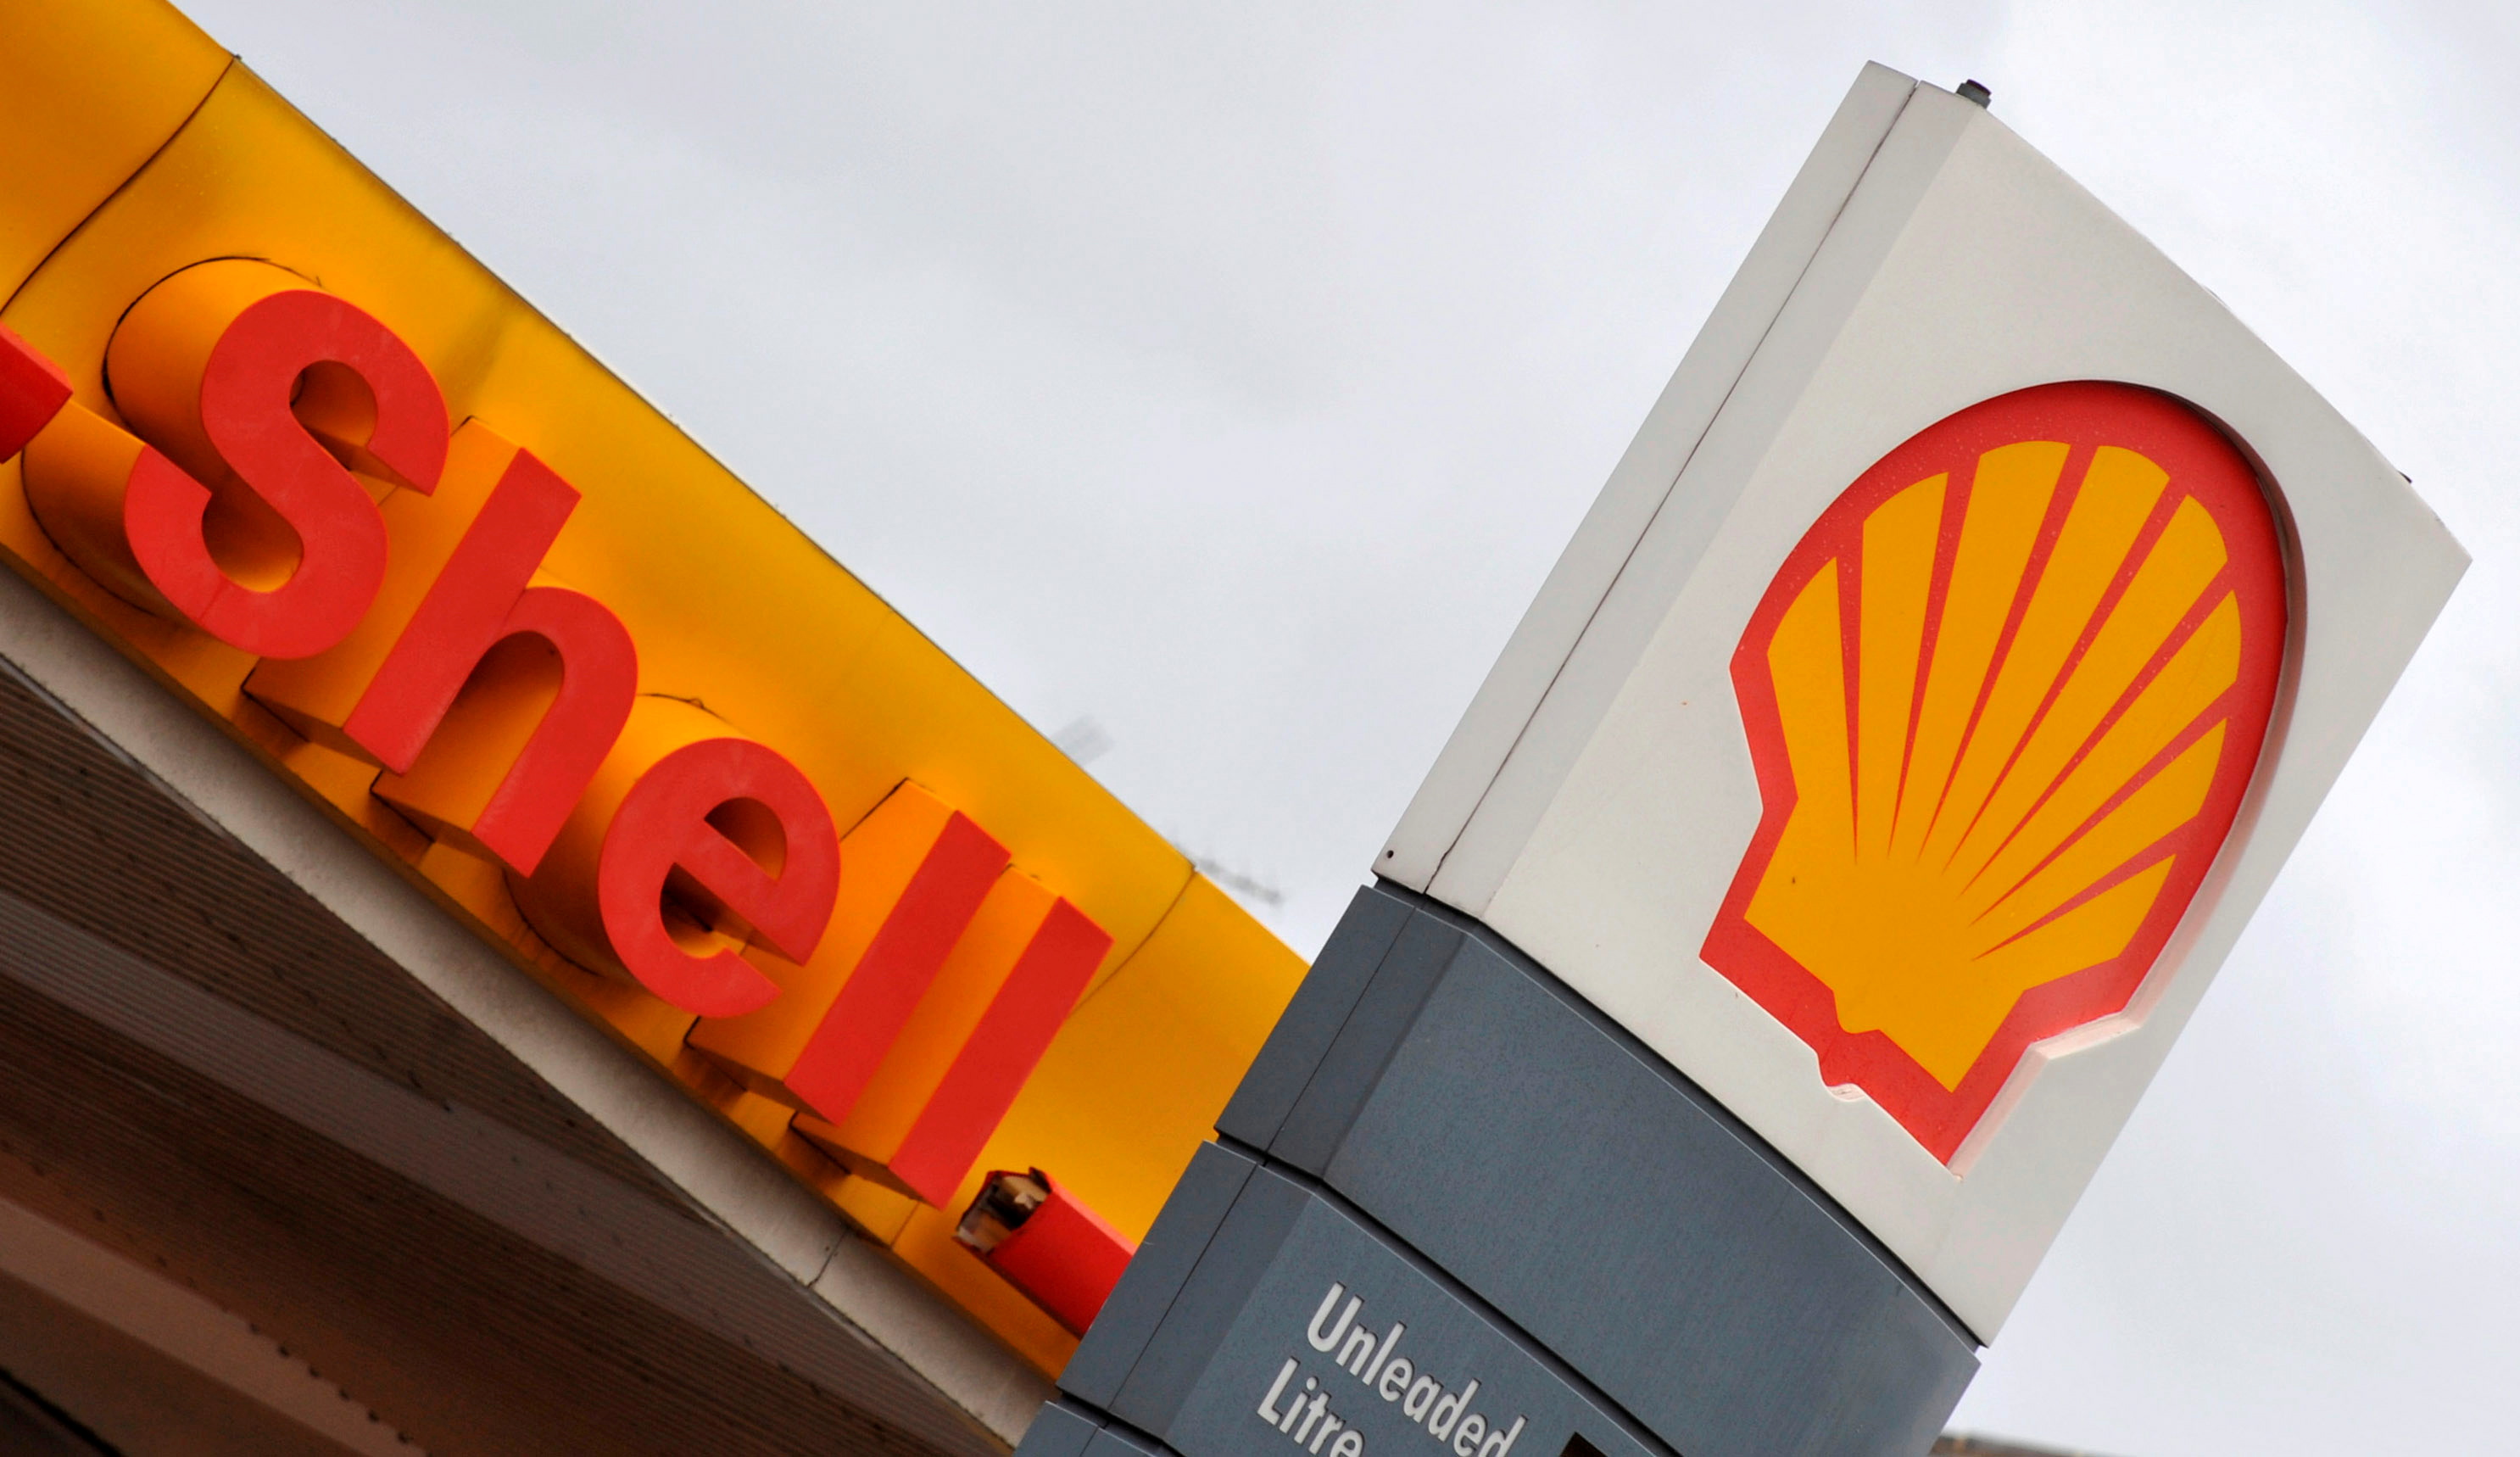 A Shell petrol station in London